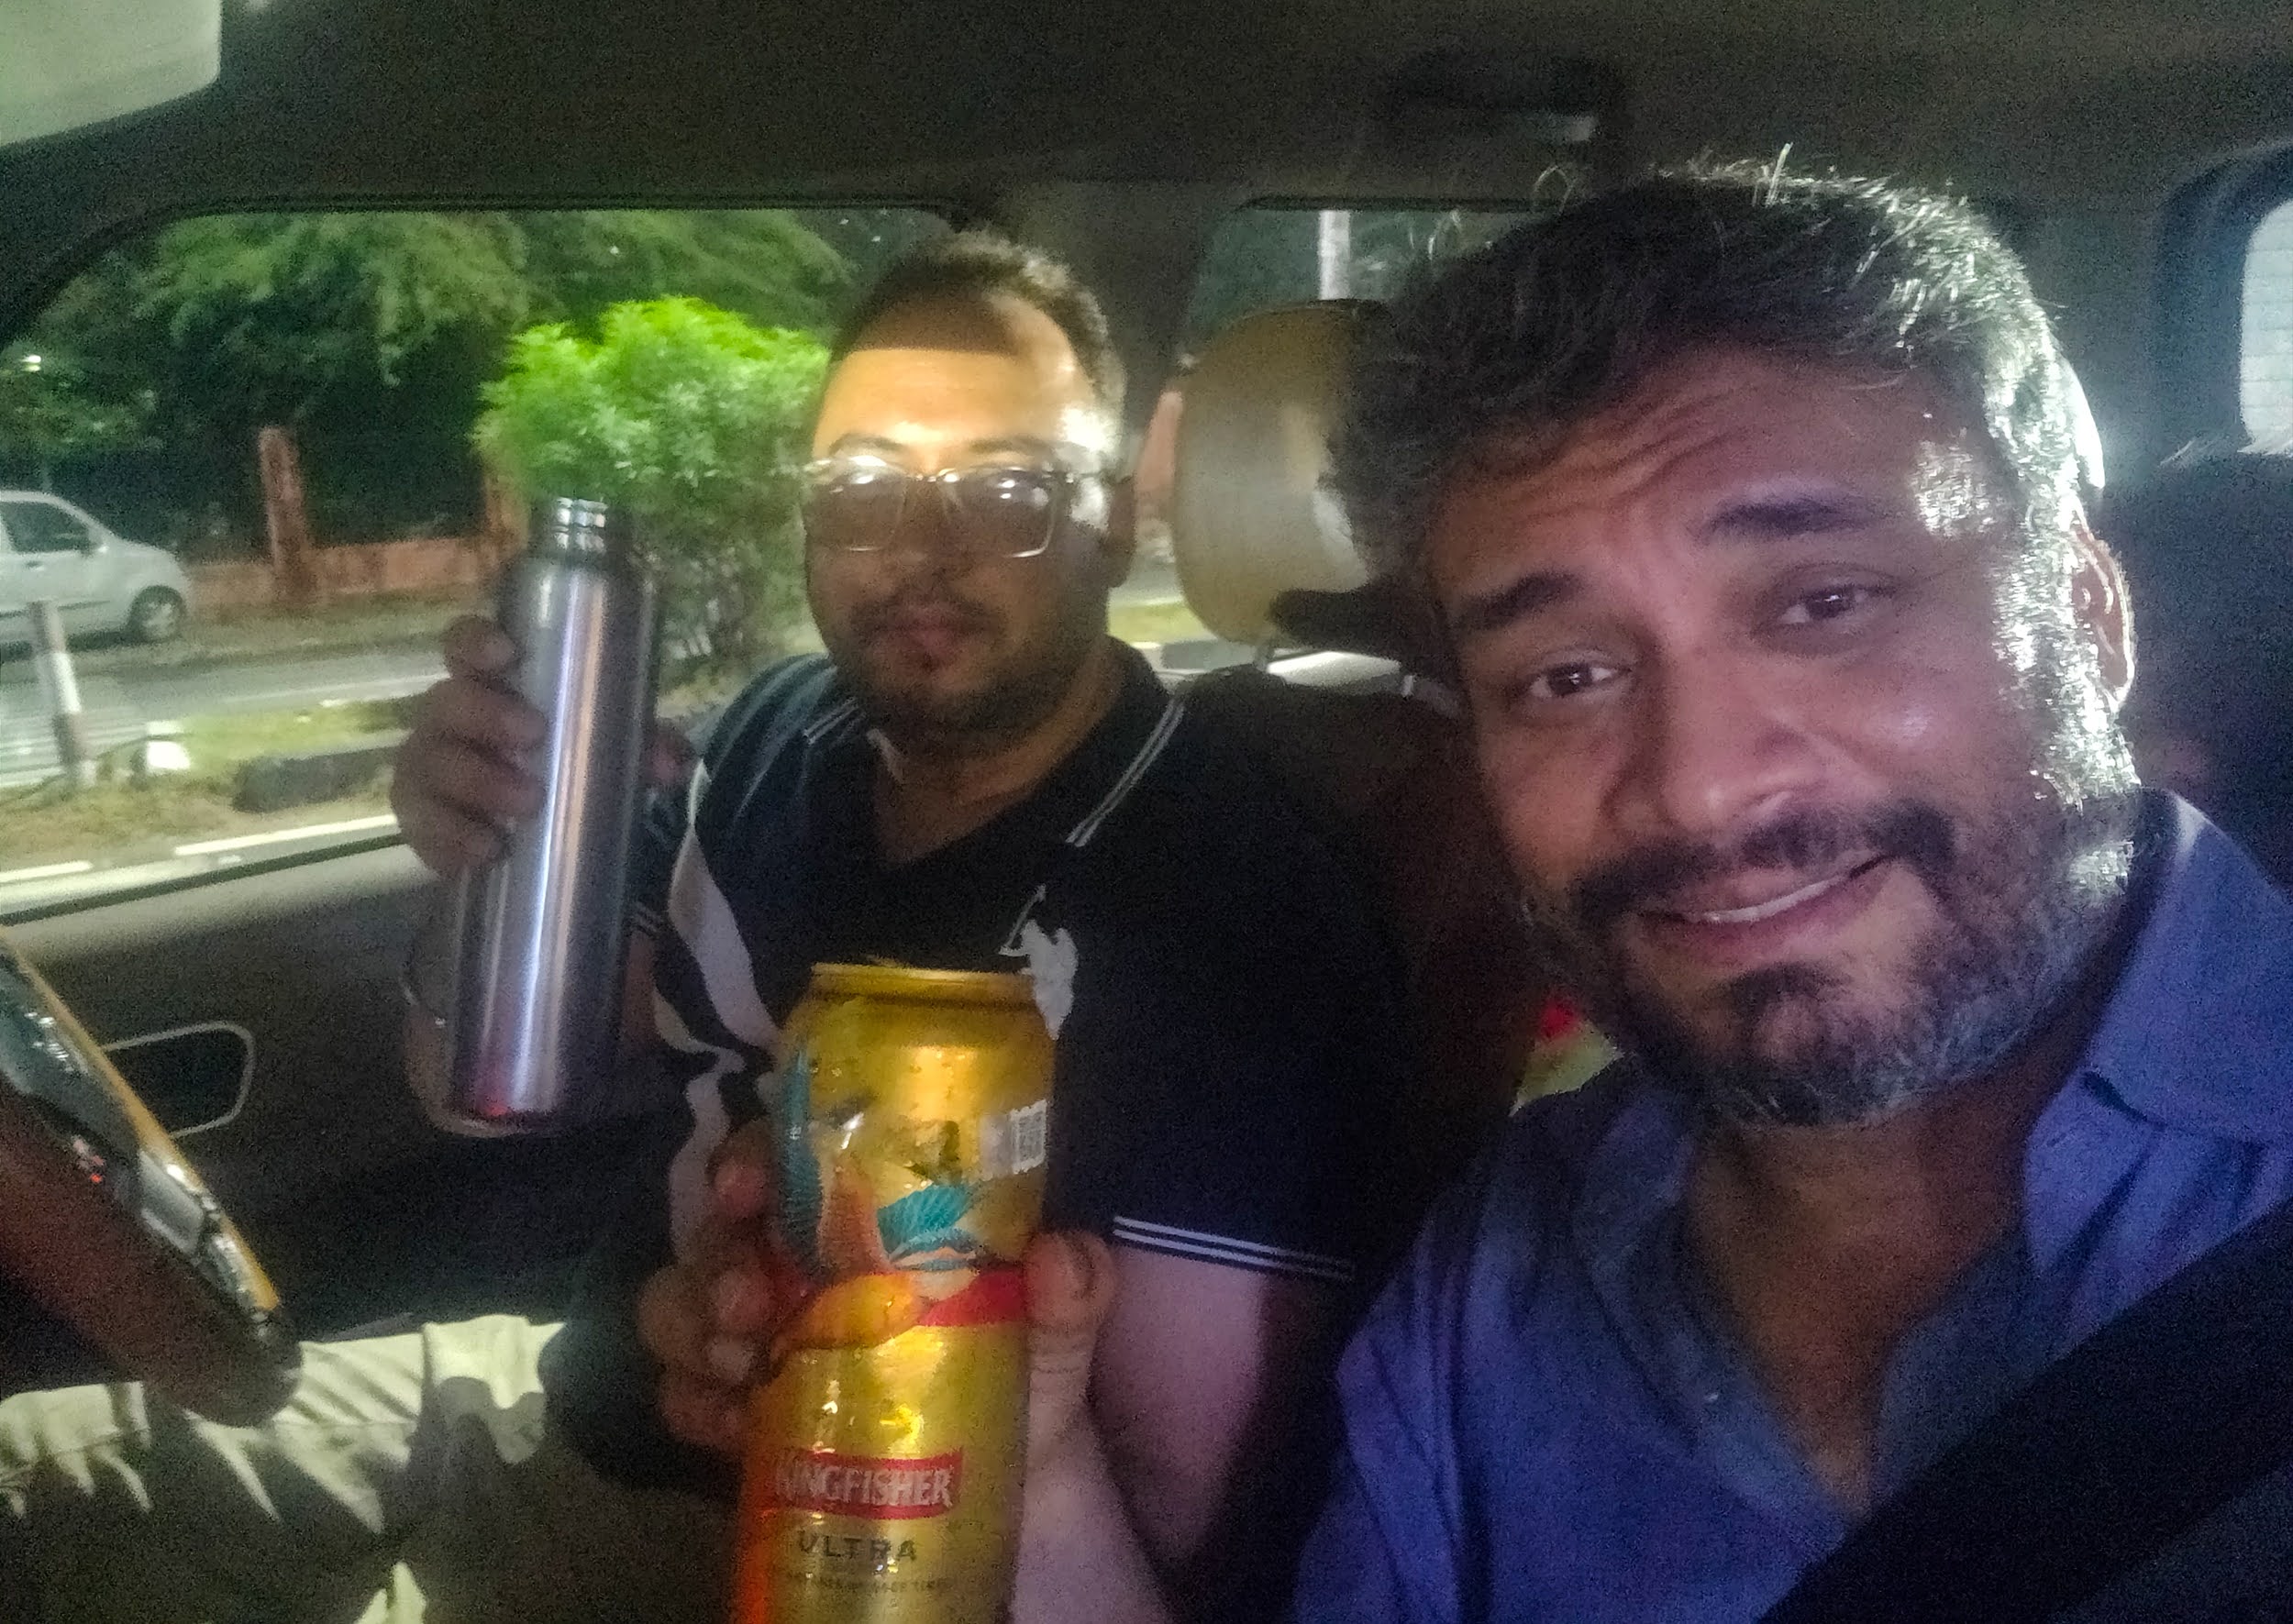 To end the Day a Chilled Beer with Rahul and Meha.